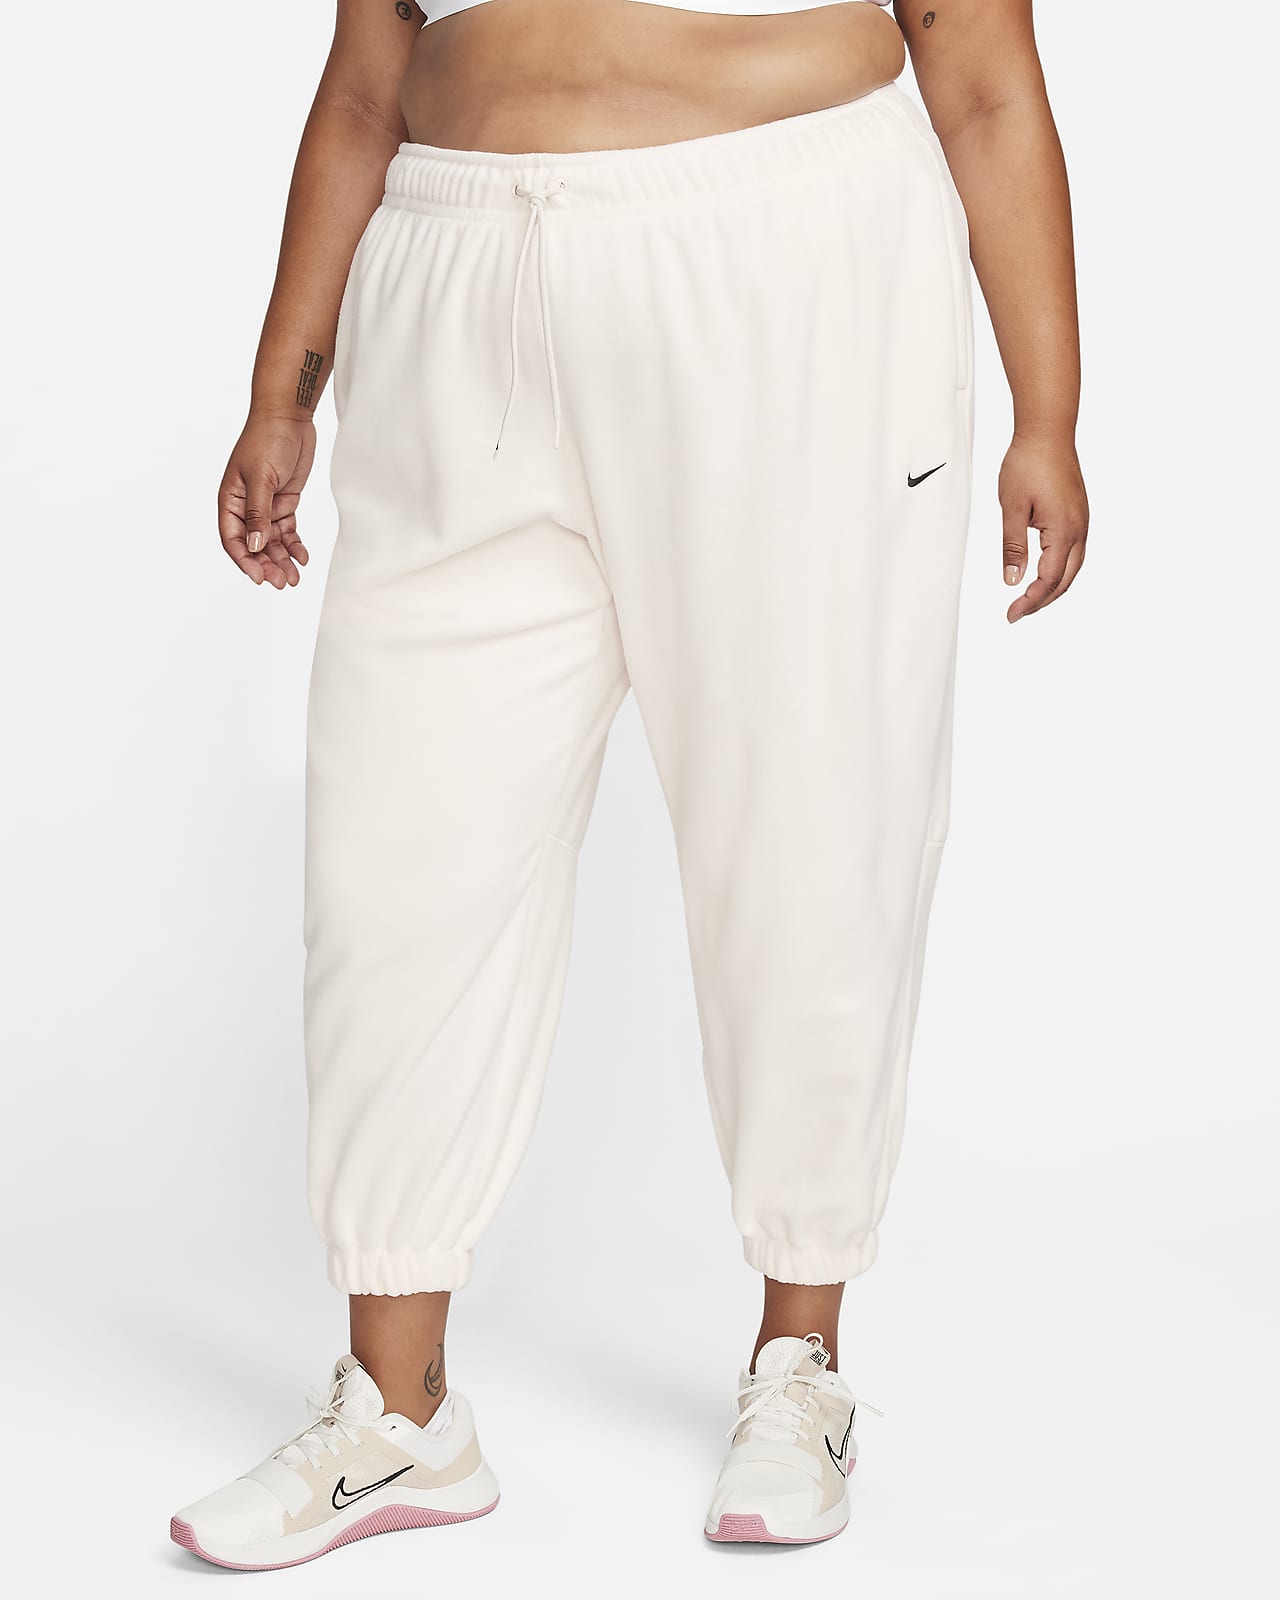 Plus Size Grey Track Pants High Rise Elastic Waist | You + All | Shop Online